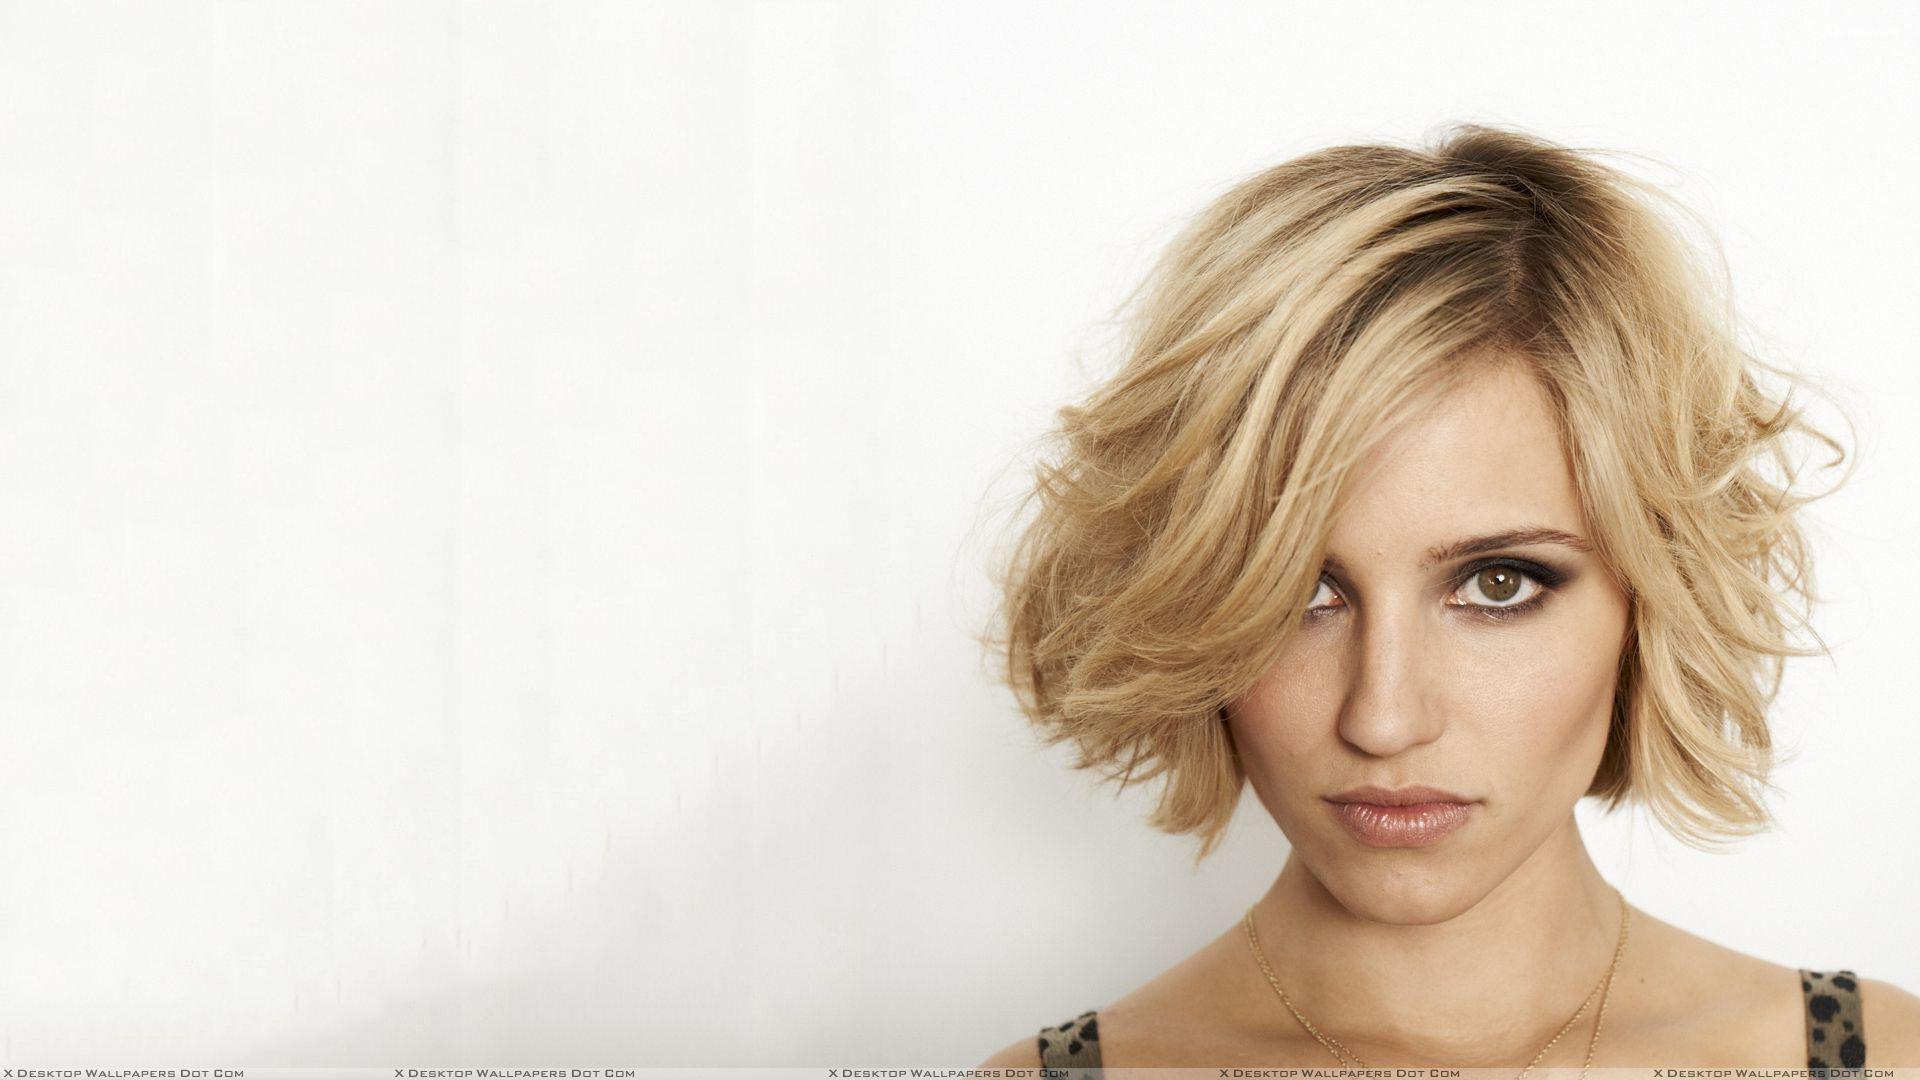 Dianna Agron Wallpaper High Resolution and Quality Download